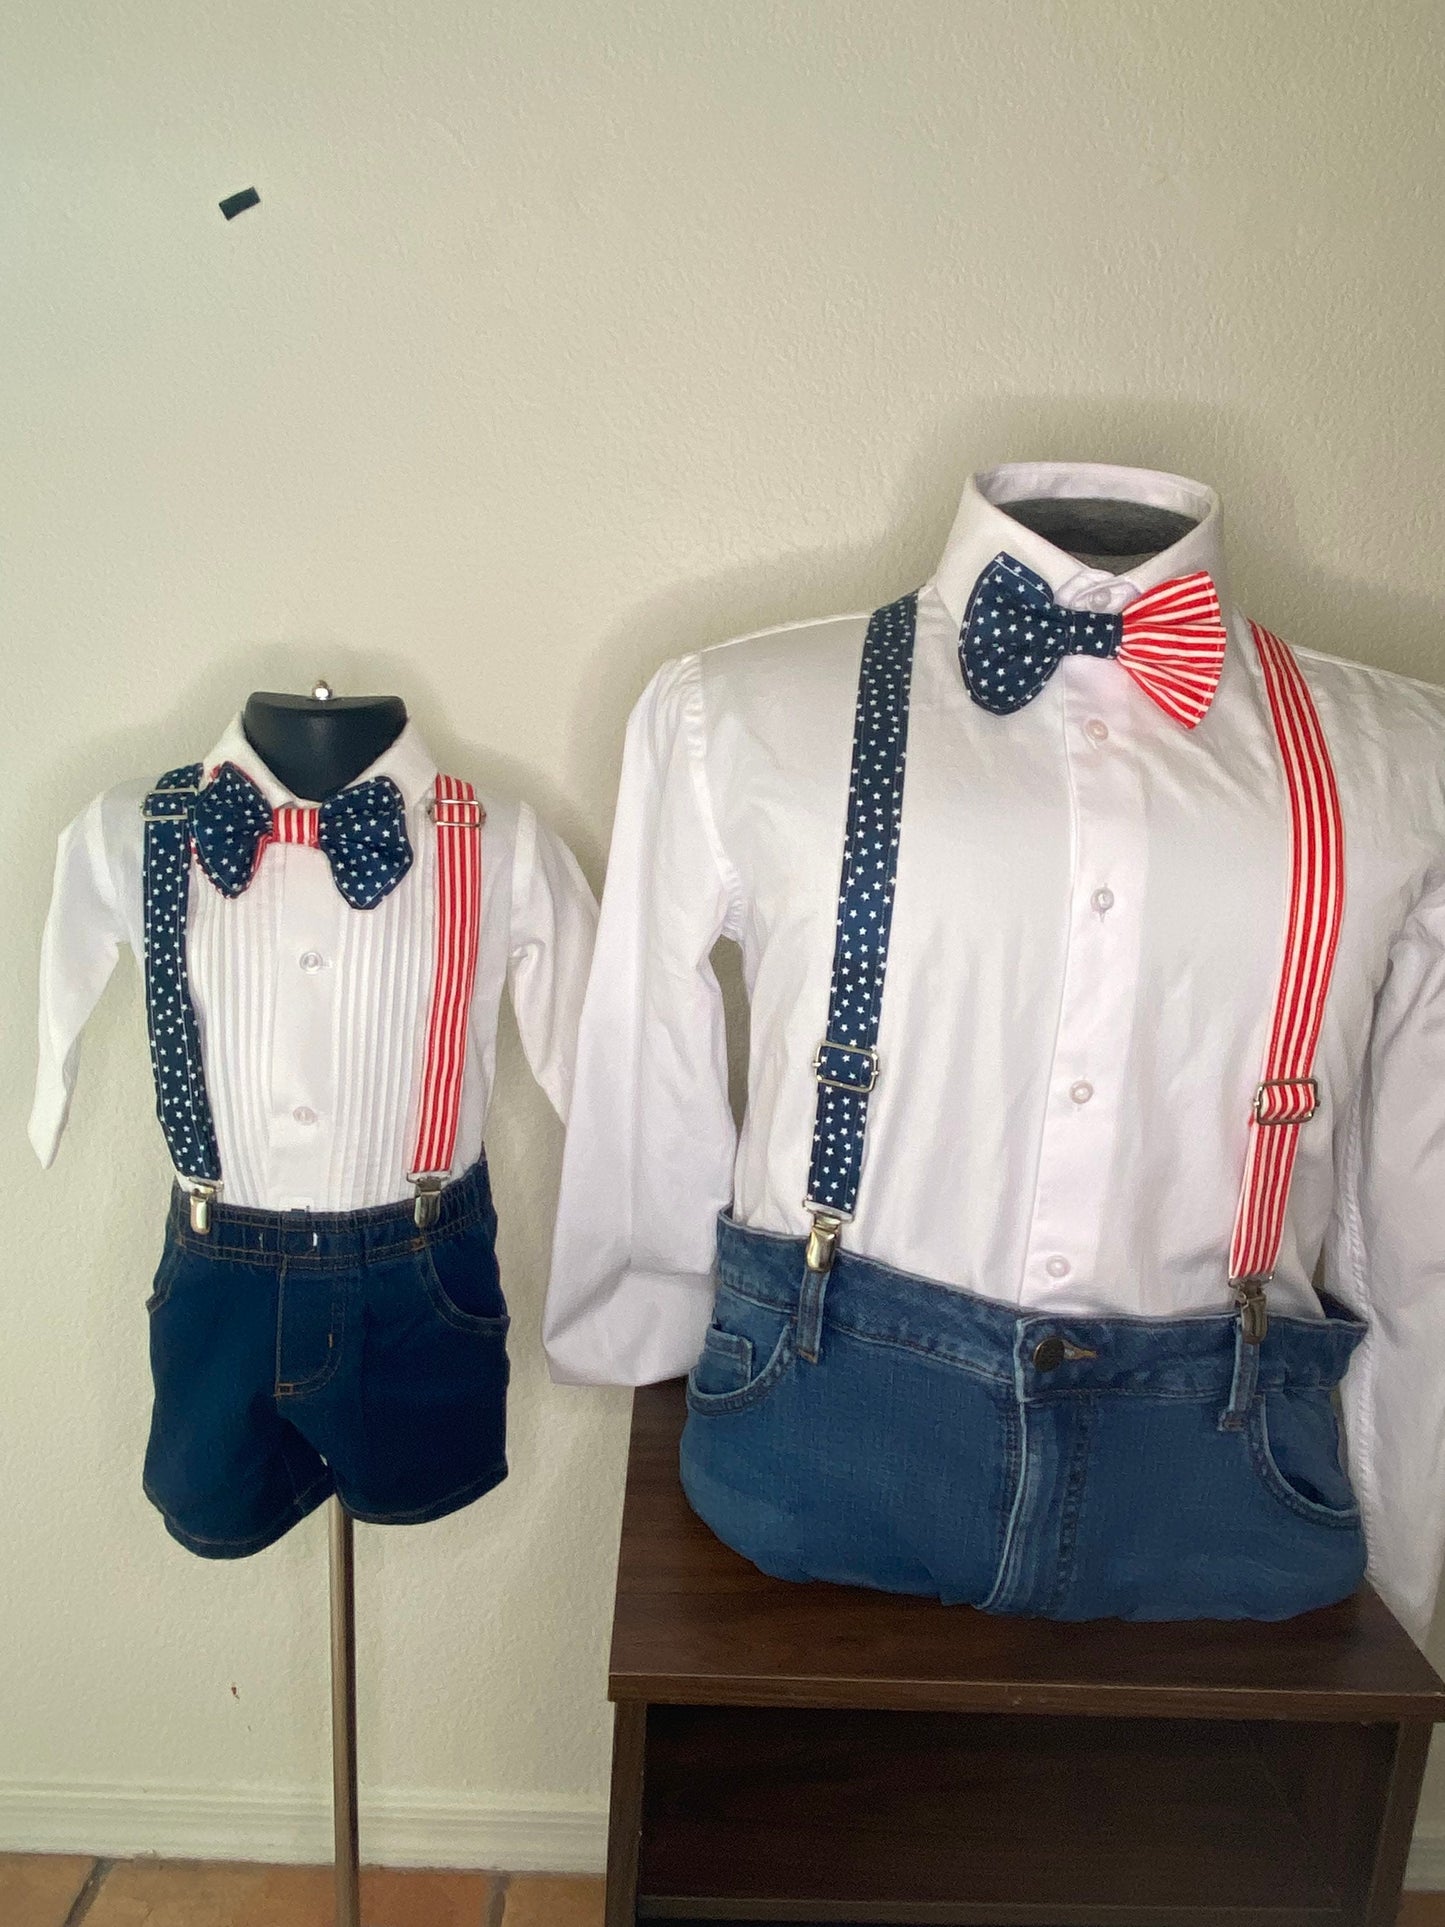 American flag bowtie and suspenders. Available in many sizes and variations. Customizable. fashionable way to show your patriotism!